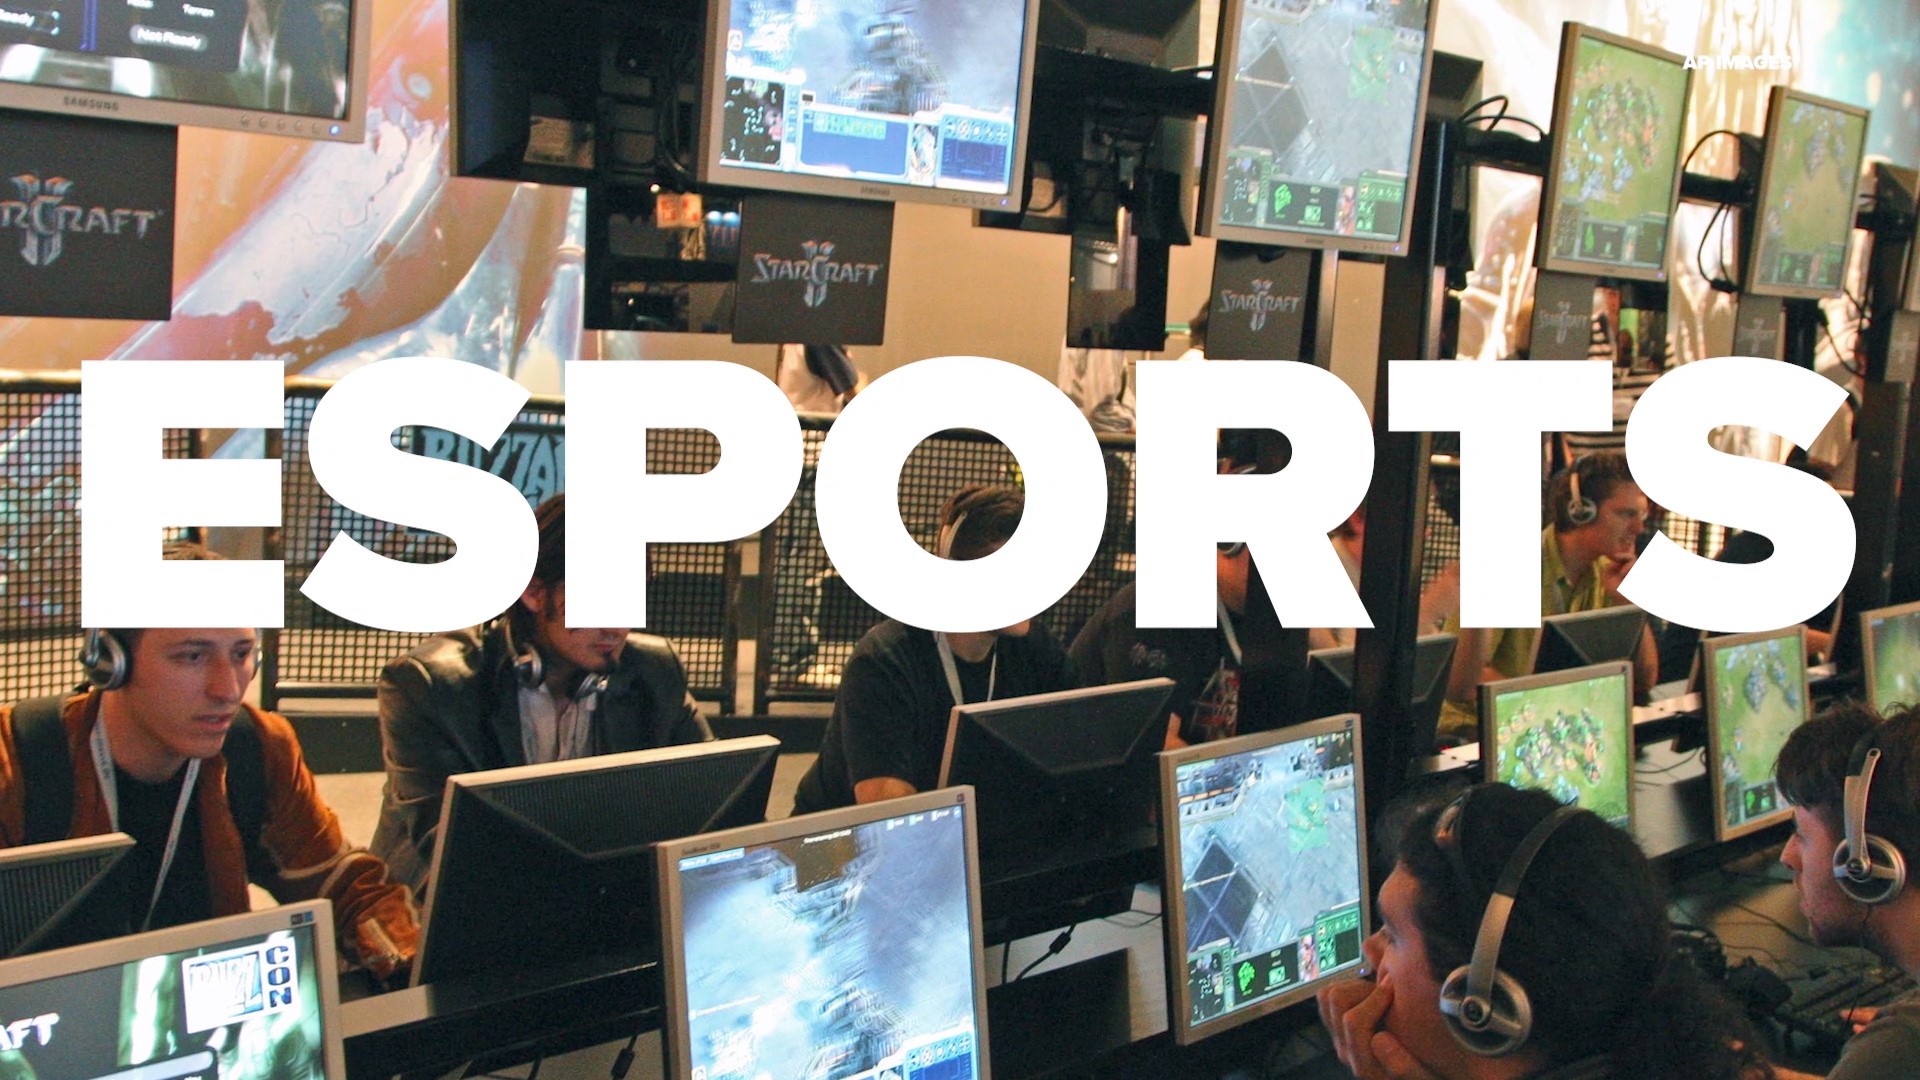 Viewership and overall interest in esports are having a moment during the pandemic